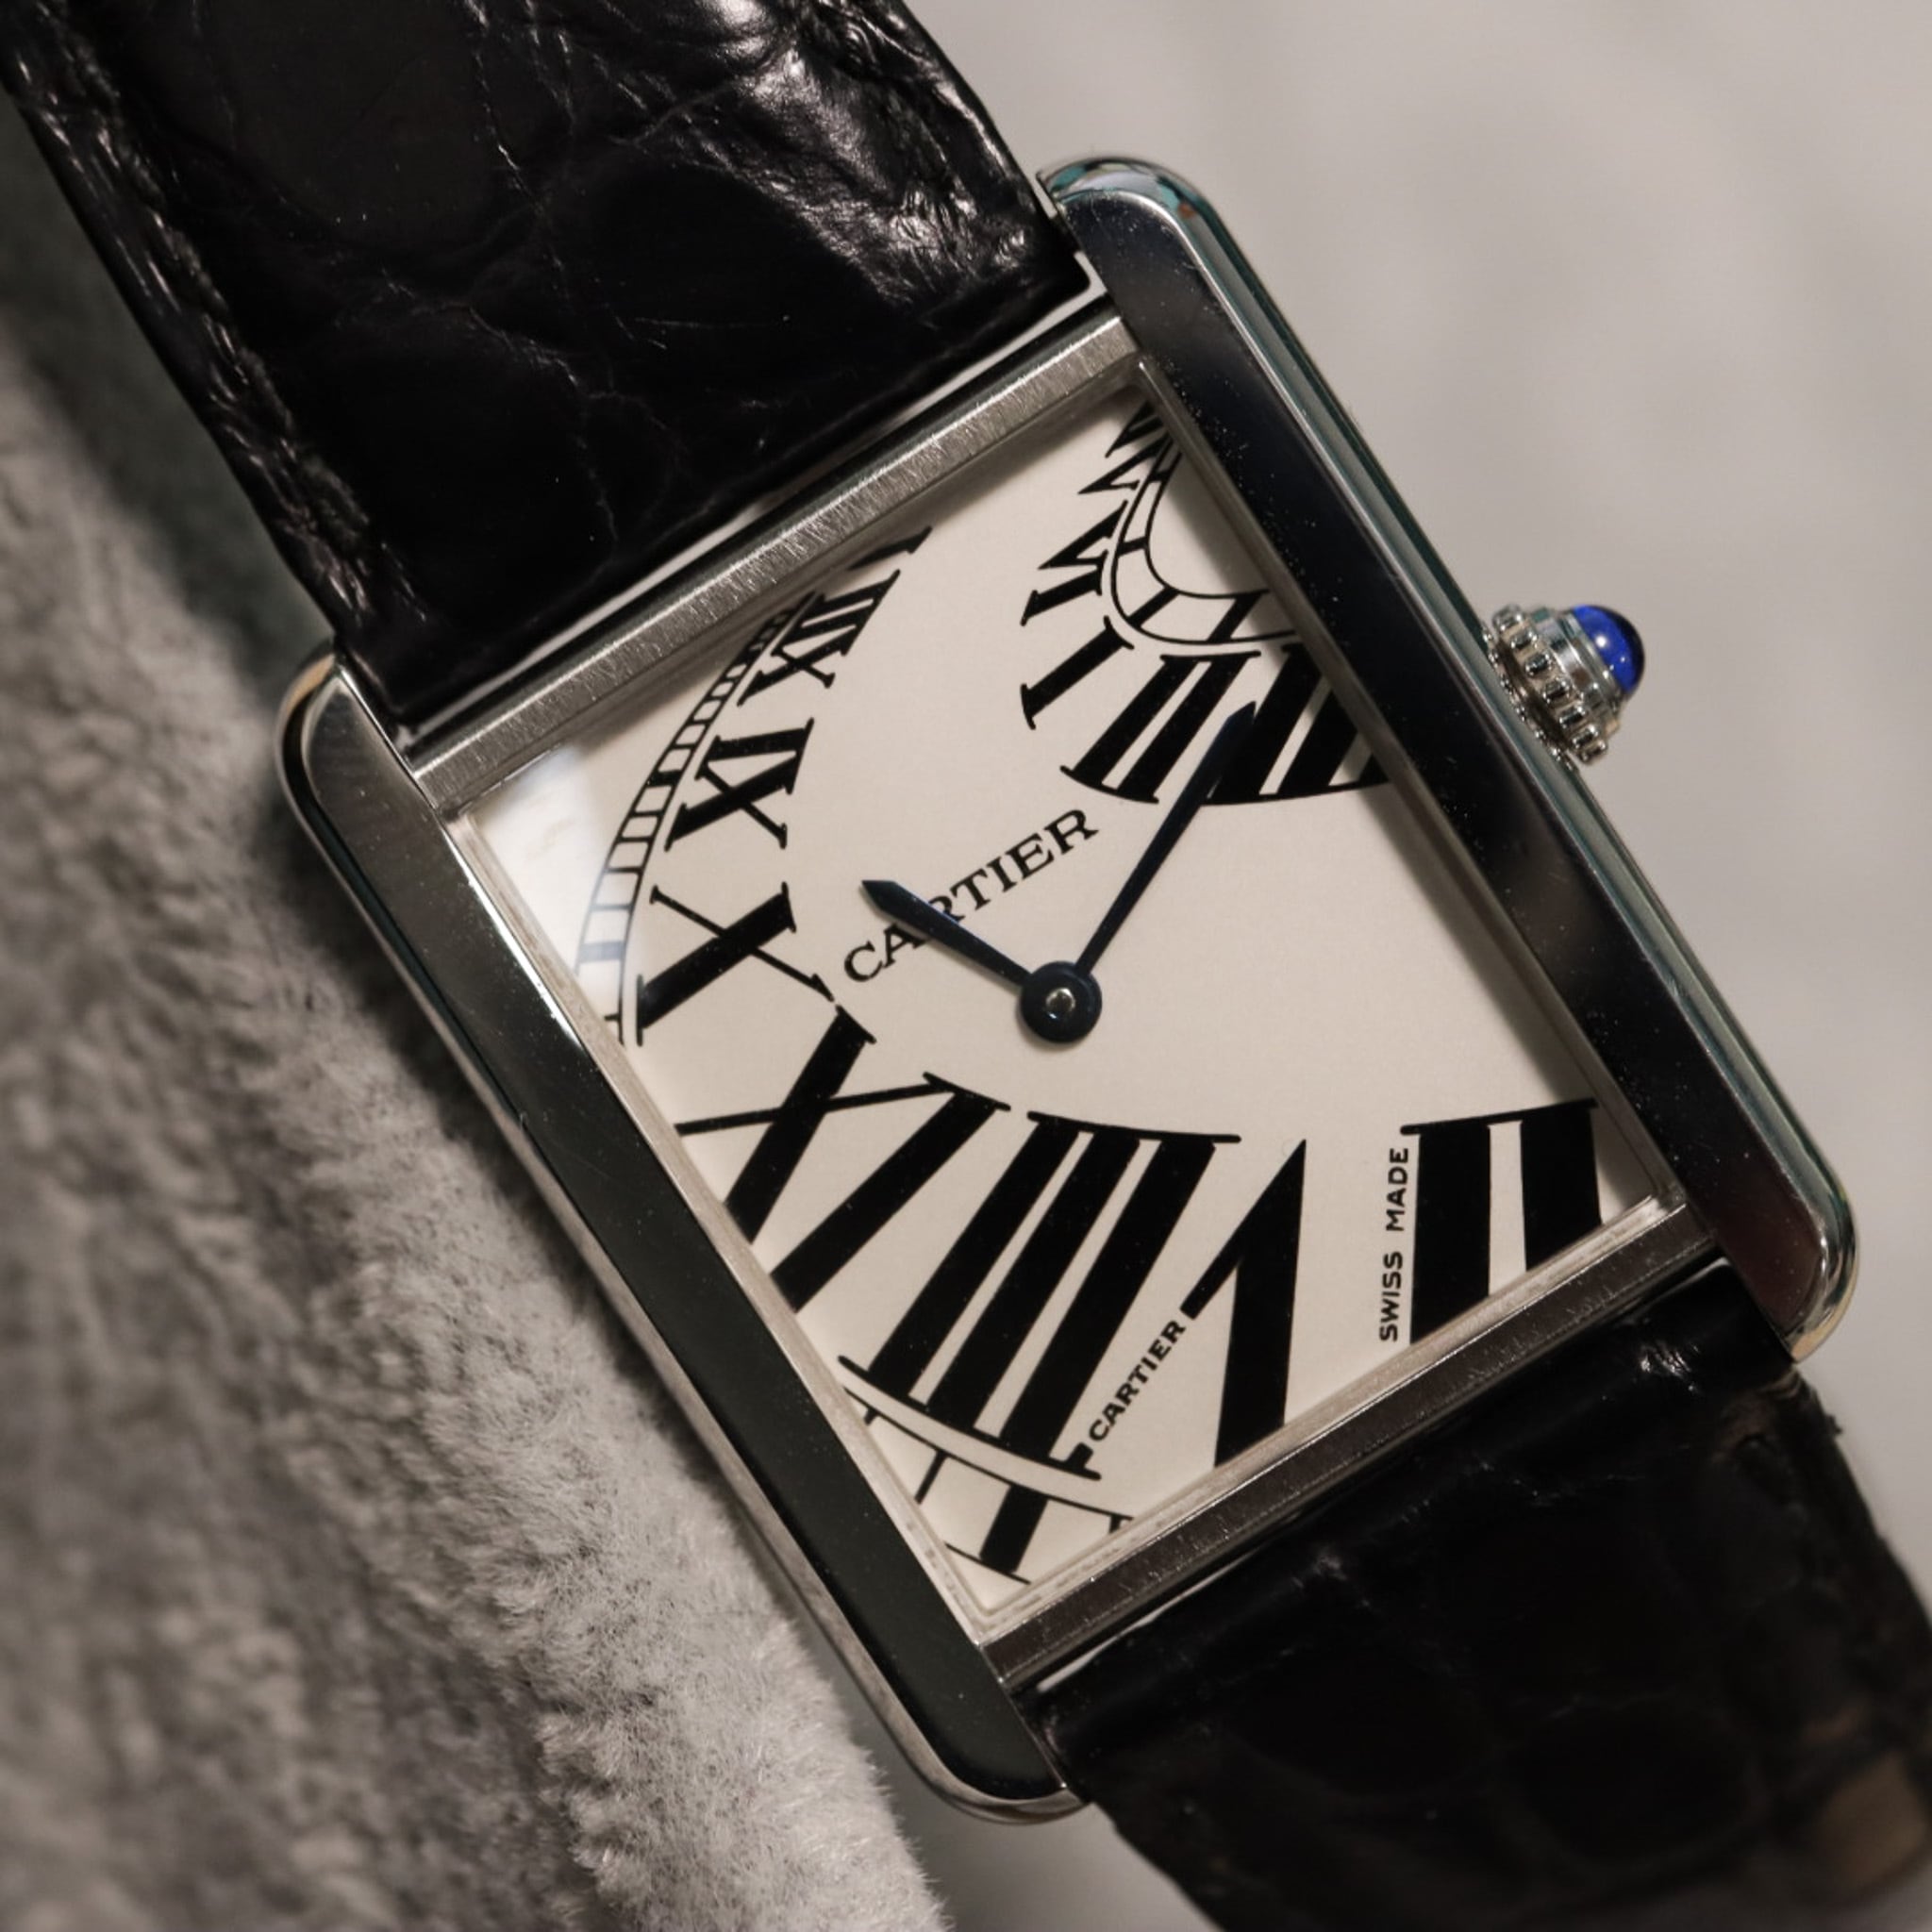 Cartier タンクソロ LM